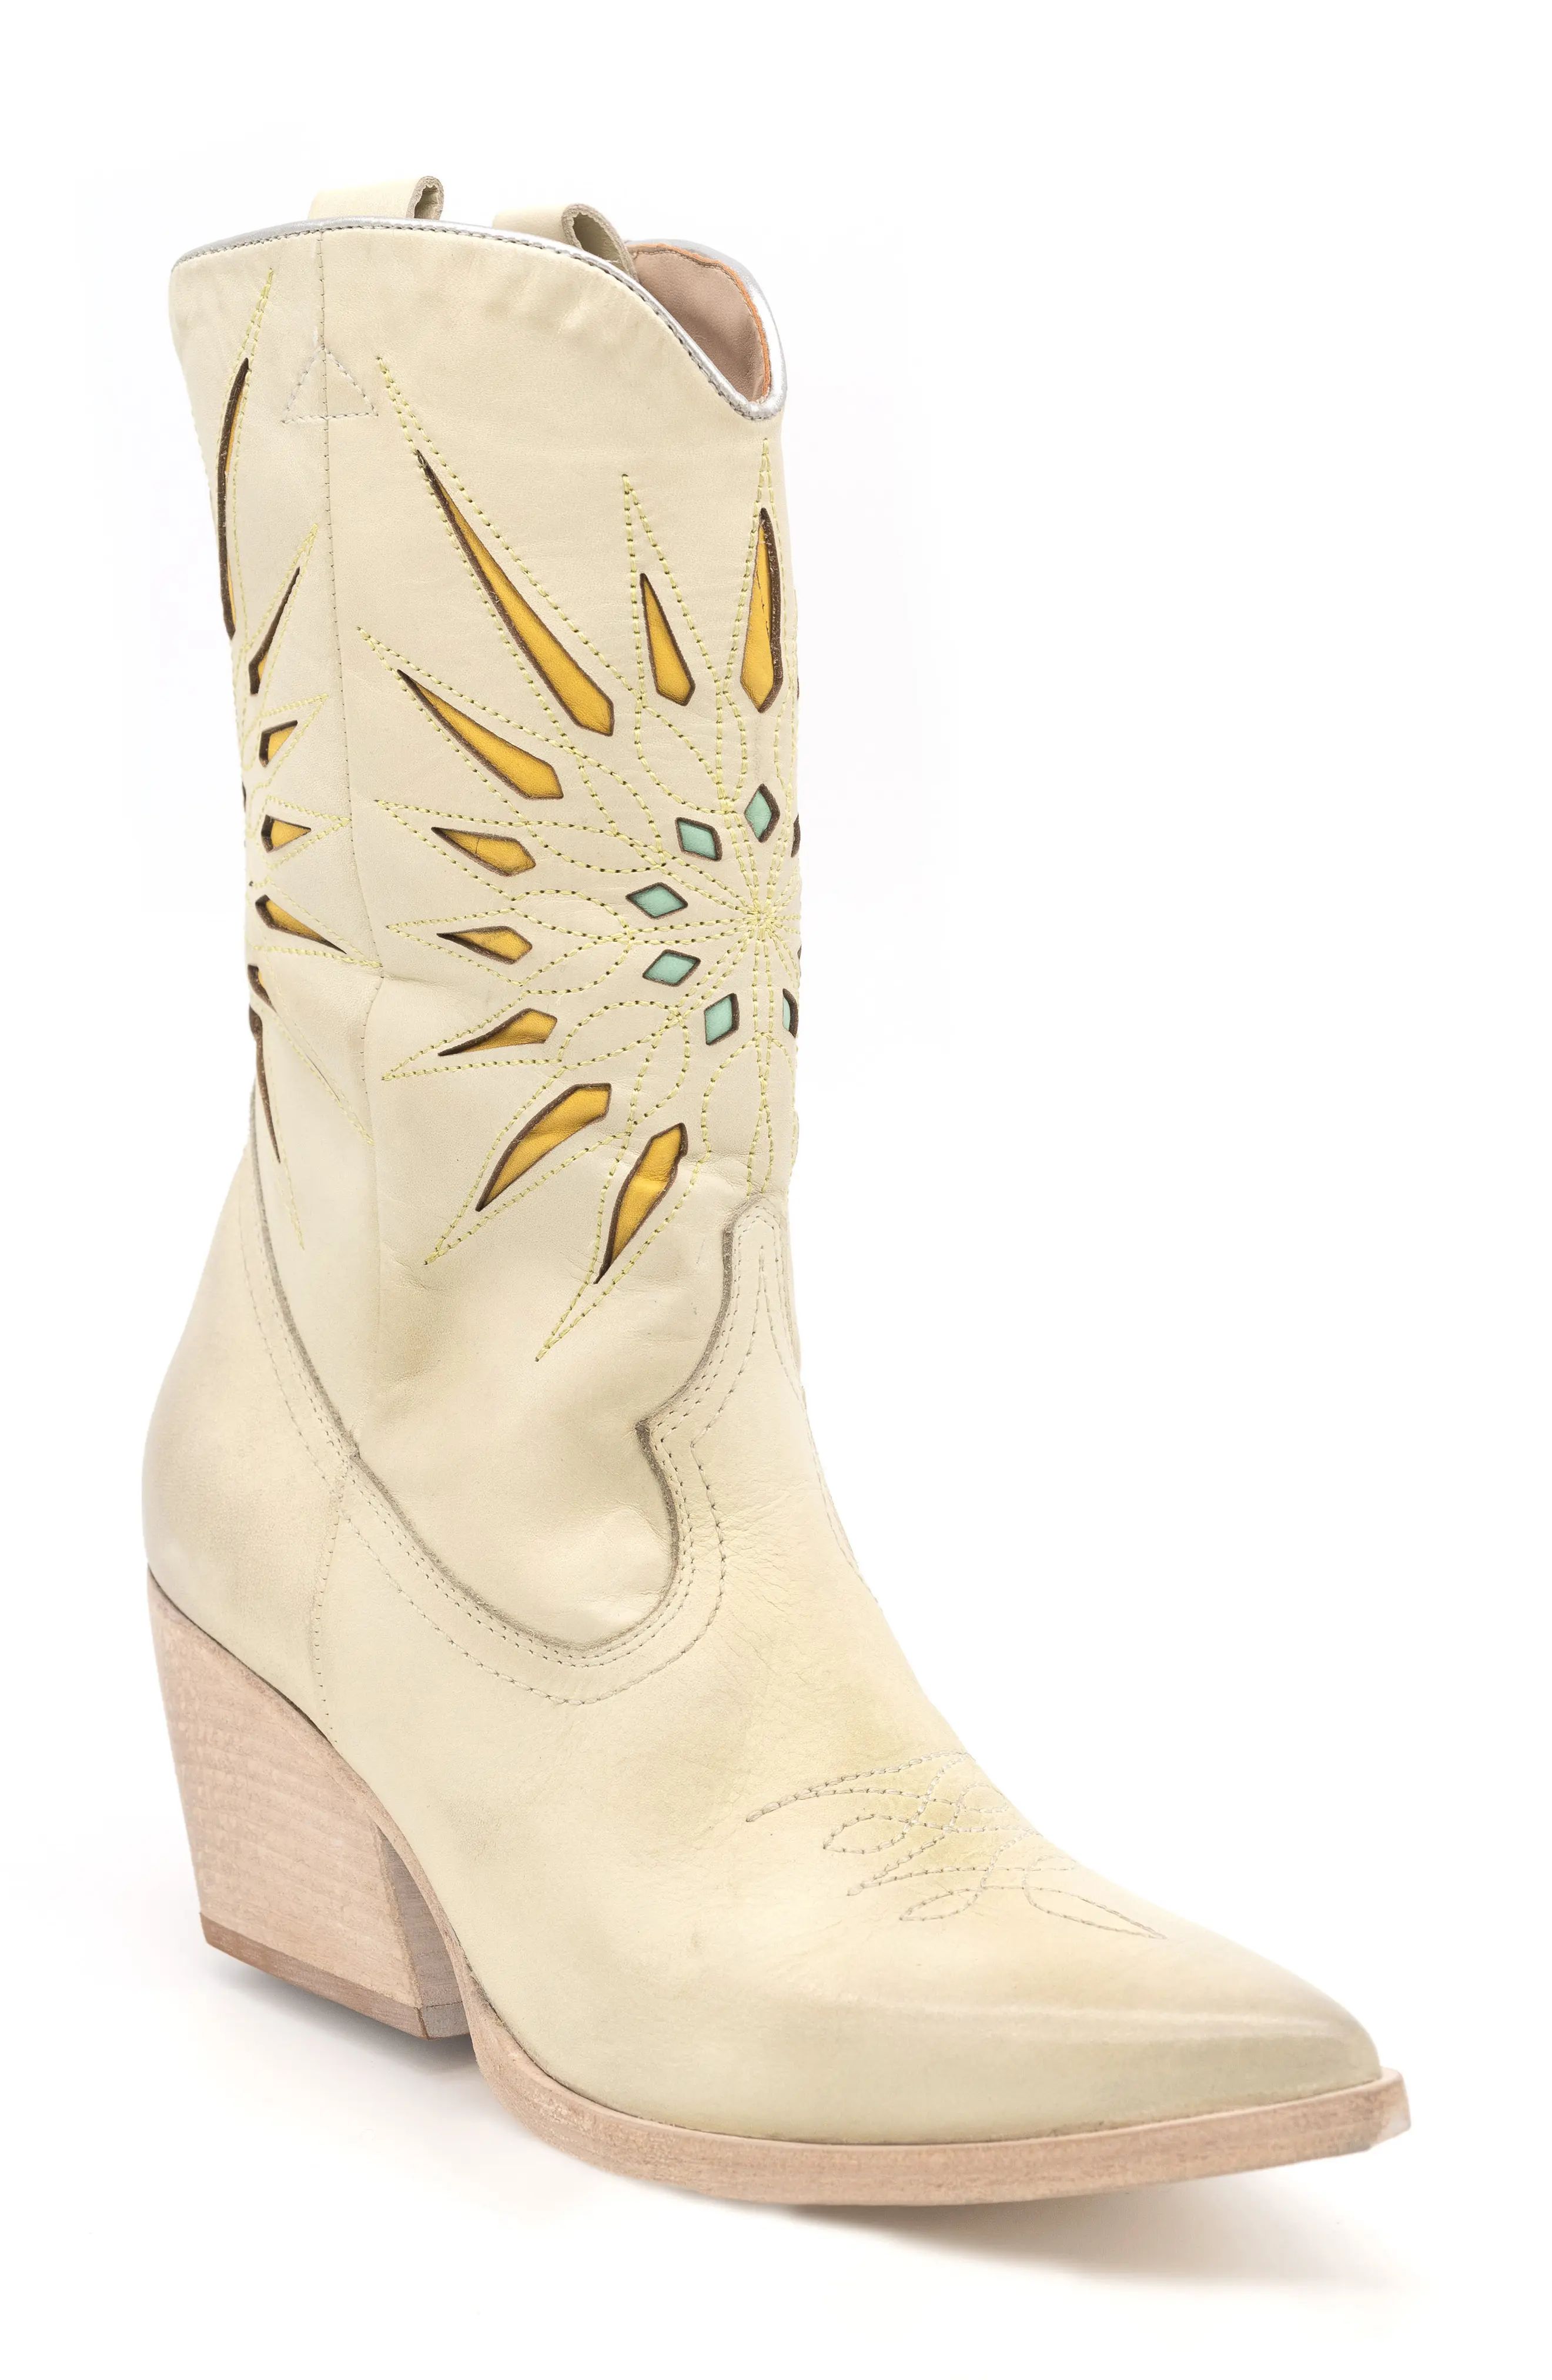 Golo Mae Cowboy Boot in Off White Vintage Calf at Nordstrom, Size 8 | Nordstrom